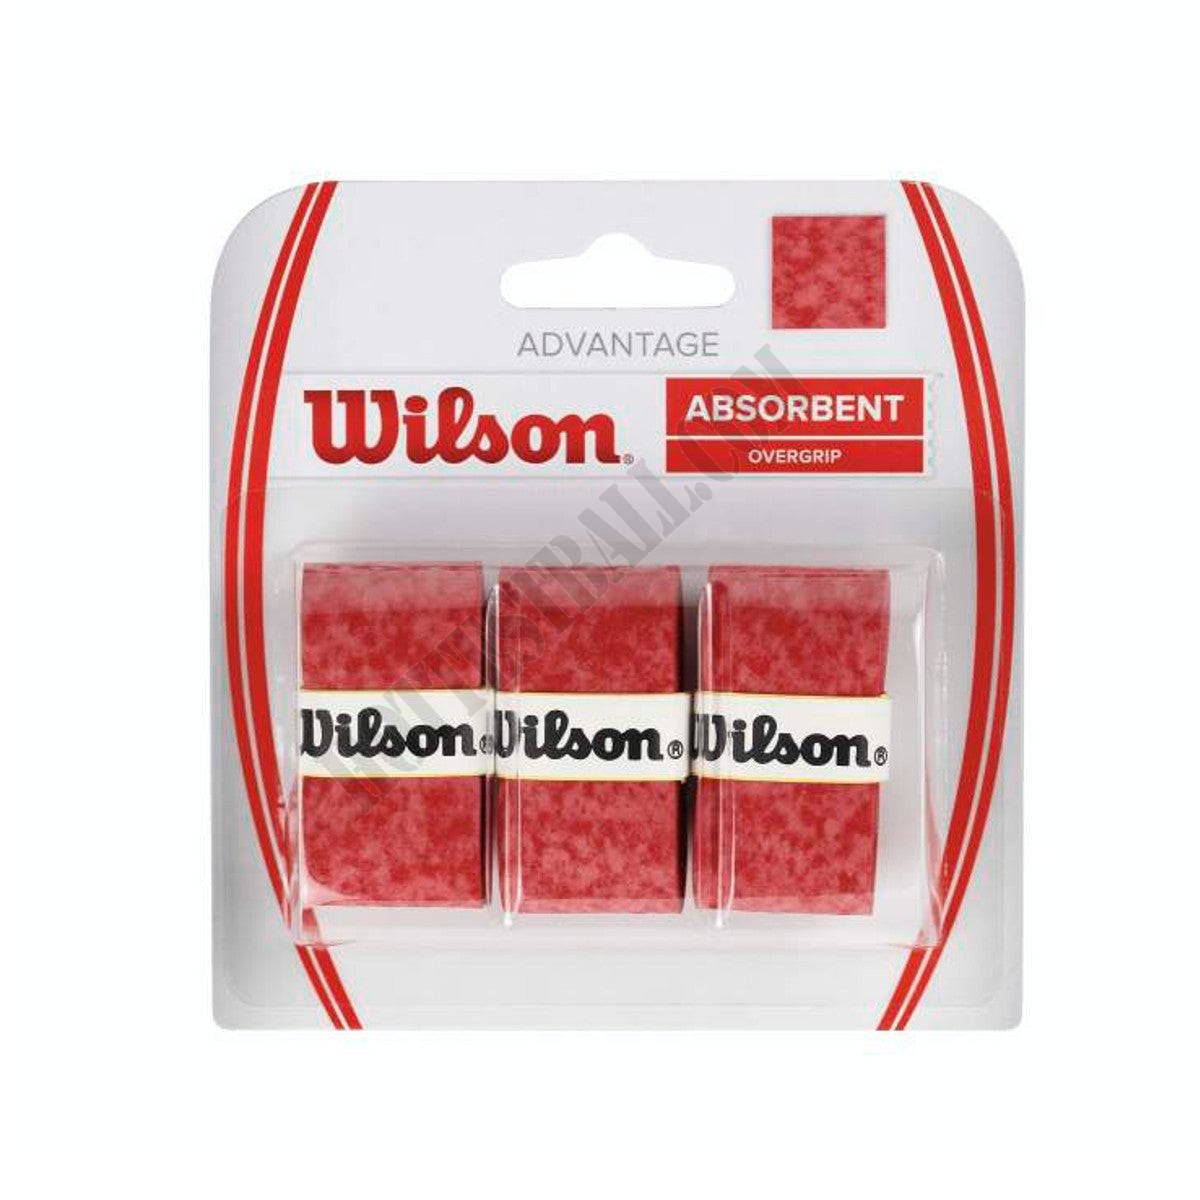 Advantage Overgip, 3 Pack - Wilson Discount Store - -3